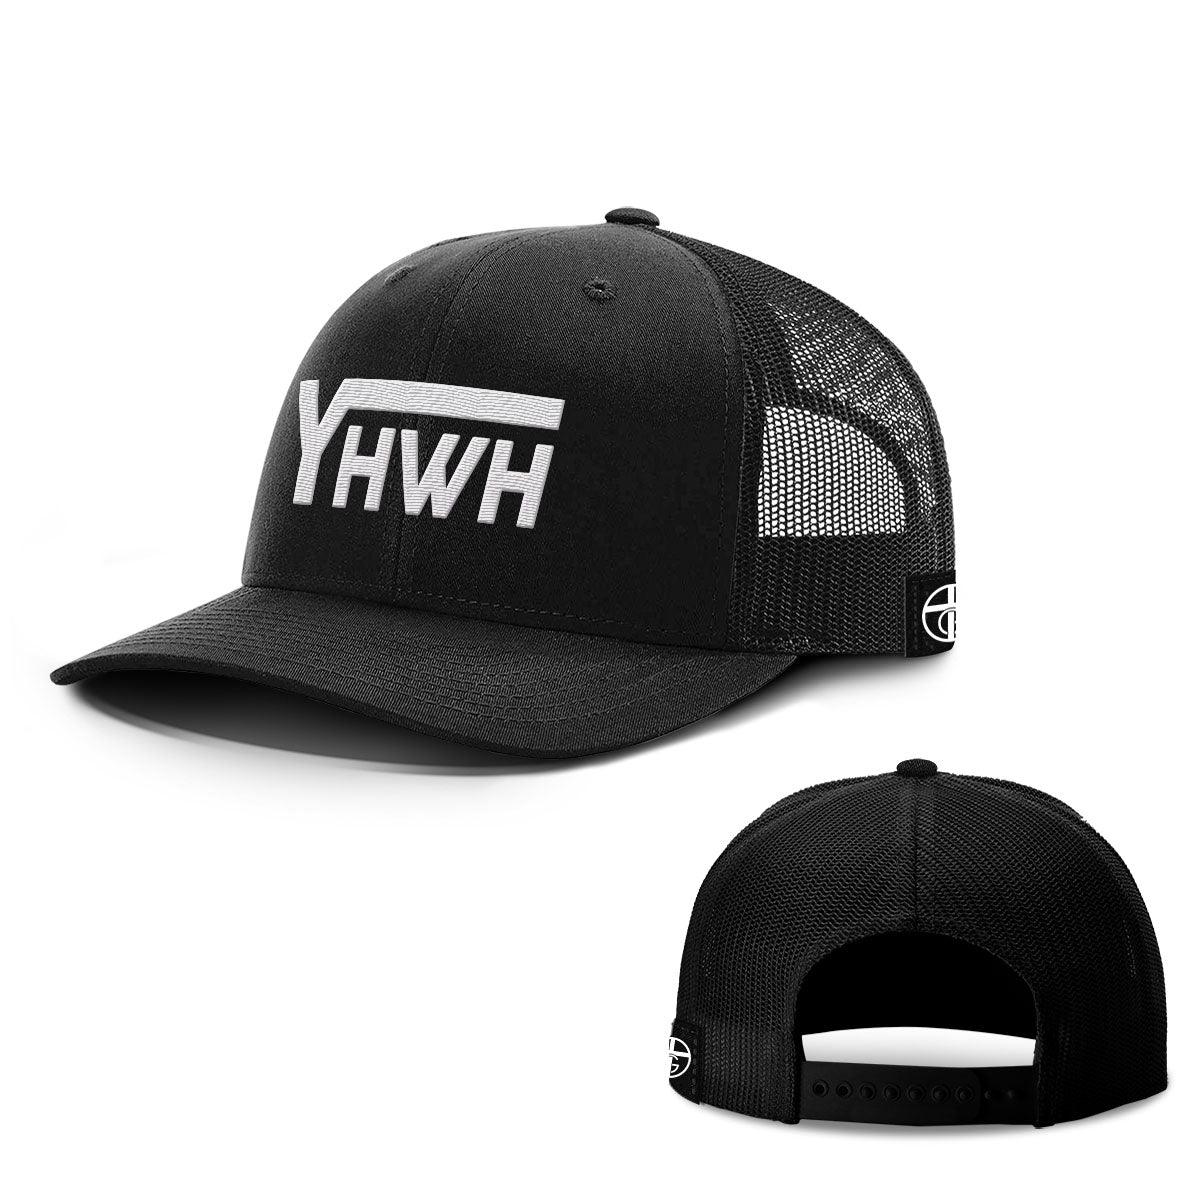 YHWH Hats - Our True God